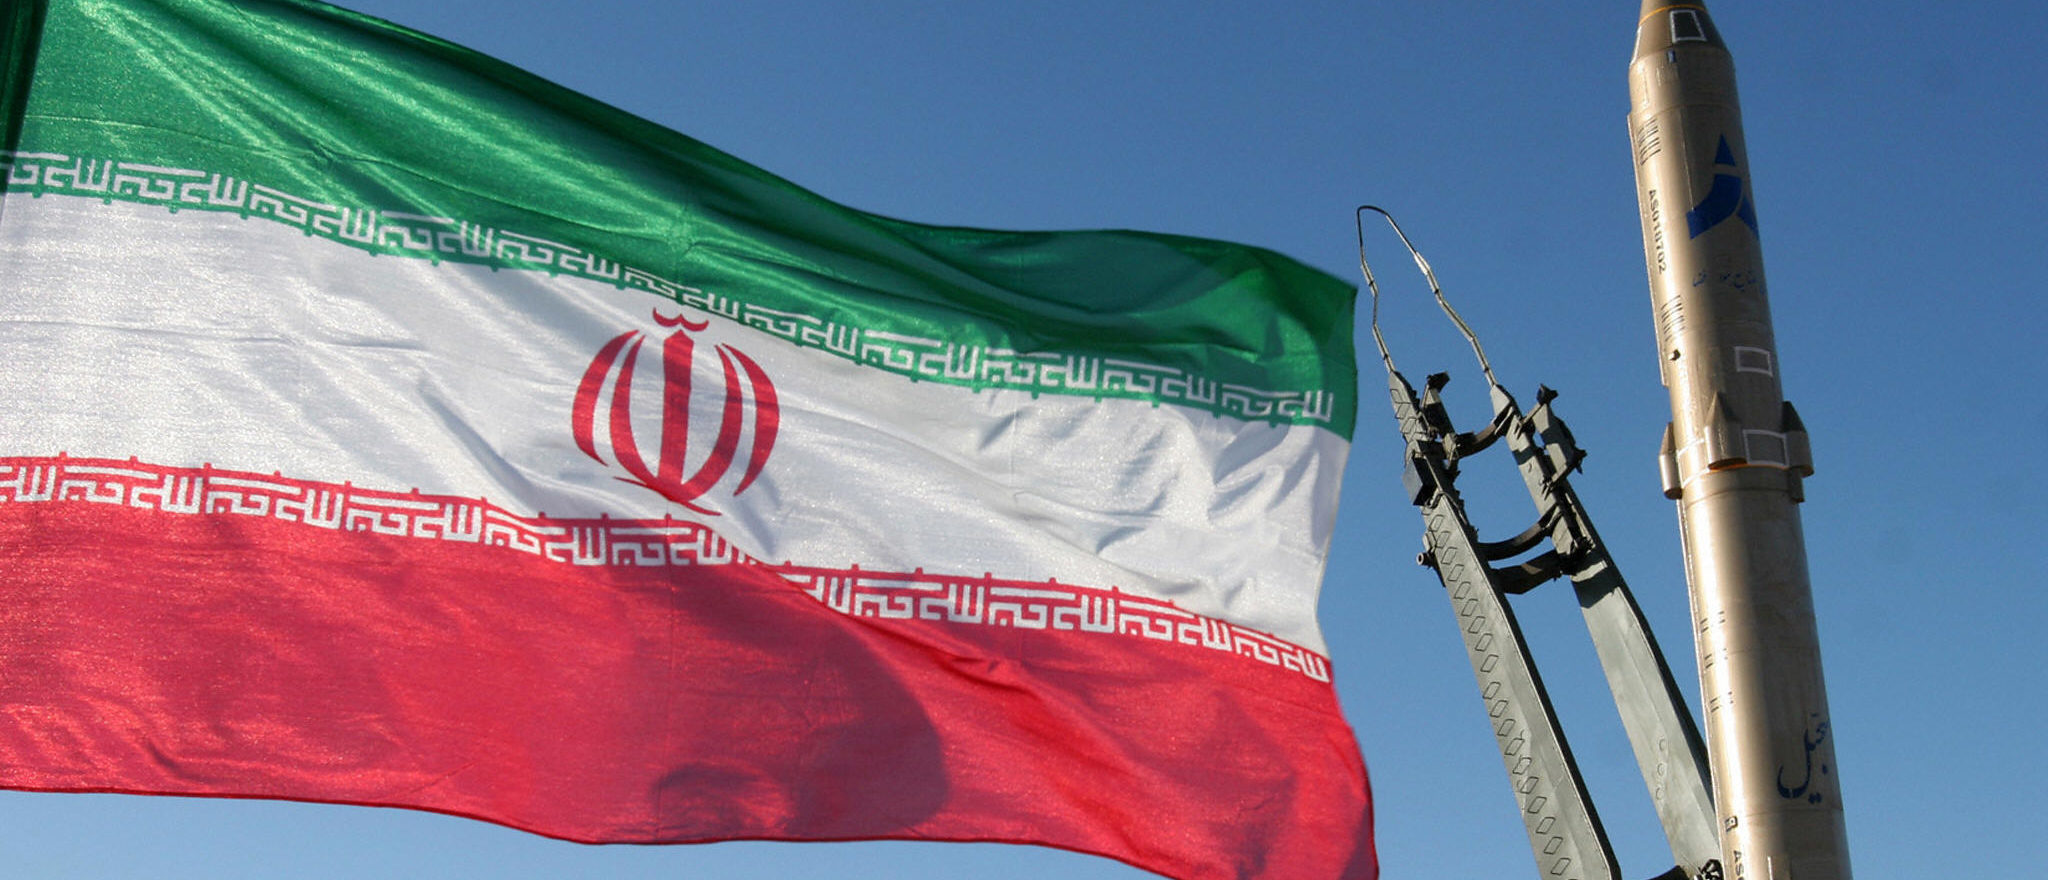 An Iranian flag flutters next to a ground-to-ground Sajil missile before being launched at an undisclosed location in Iran on November 12, 2008. Iran test fired today a new generation of ground-to-ground missile, the semi-official Fars news agency quoted the defence minister as saying. In the past Iran has often boasted of developing new weapons systems only to be met with scepticism from Western defence analysts. AFP PHOTO/FARS NEWS/STR (Photo credit should read -/AFP via Getty Images)